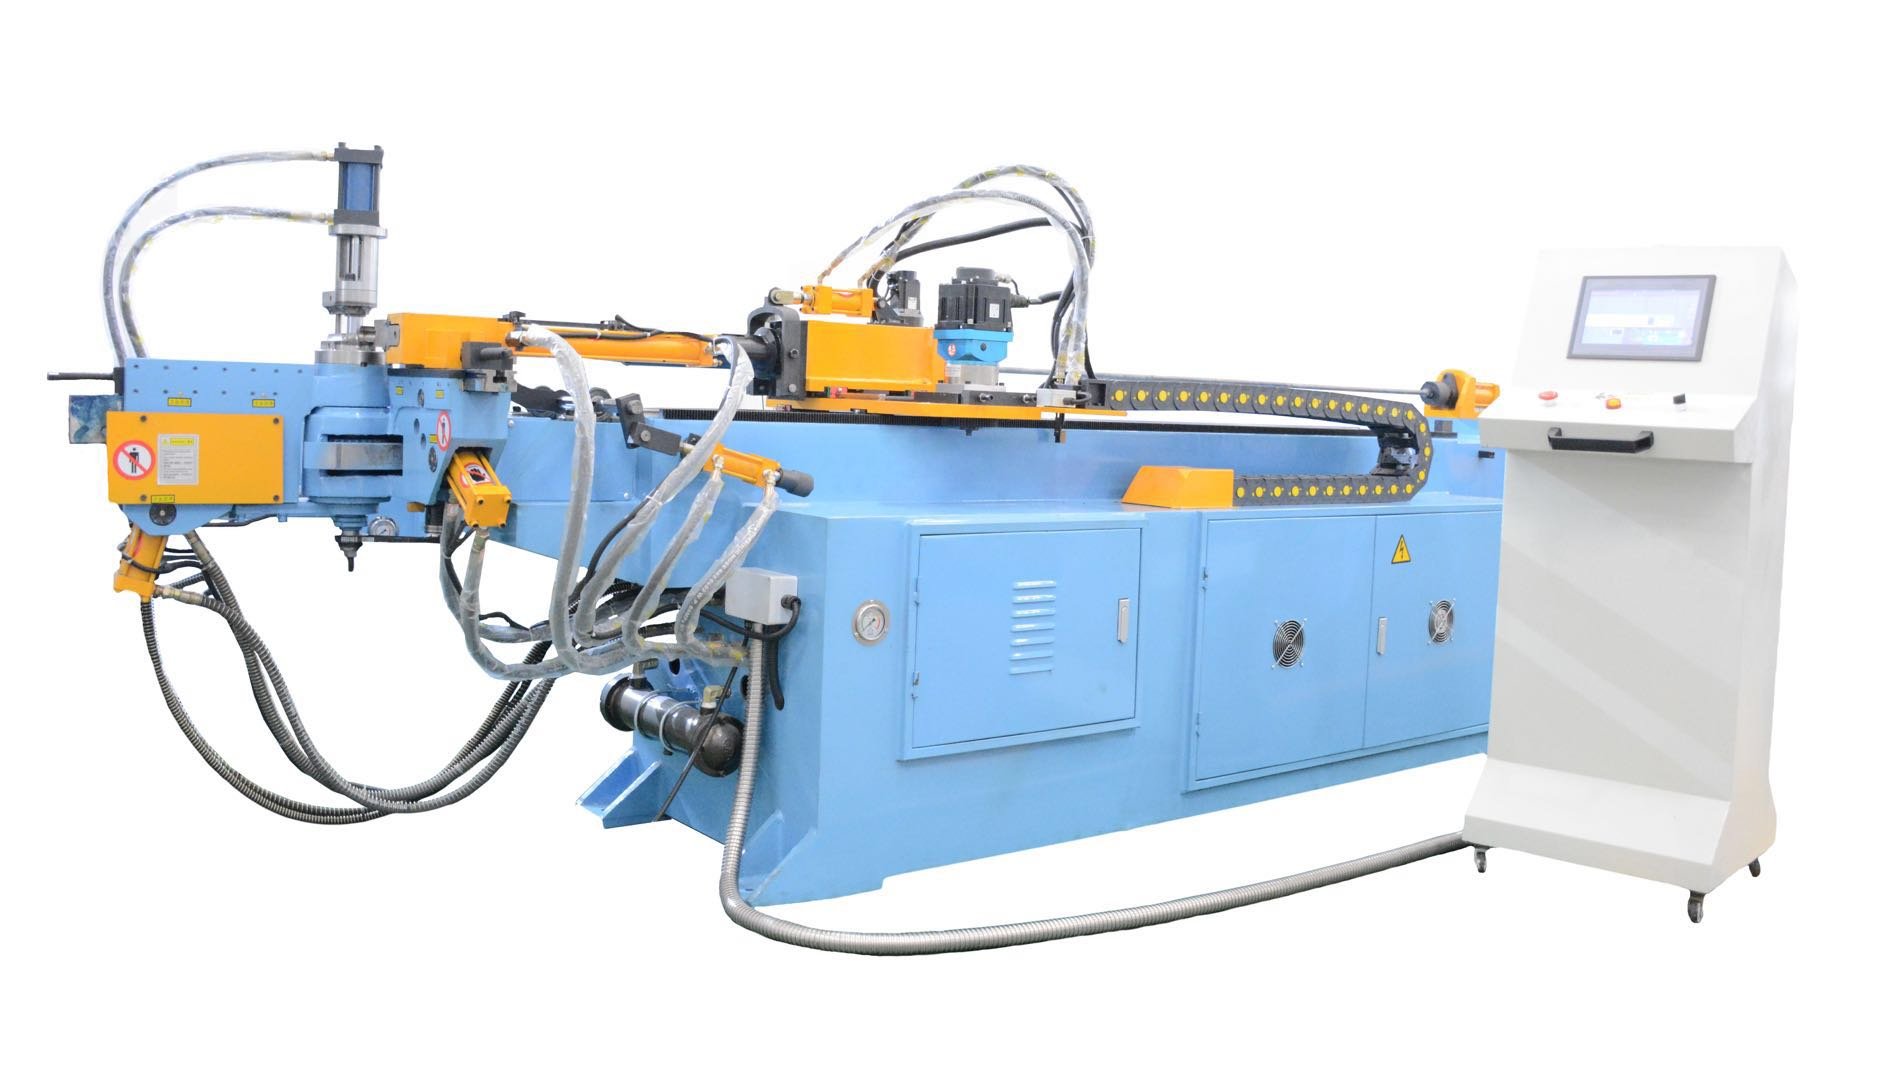 How to deal with the deformation of moulds of pipe bending machine?